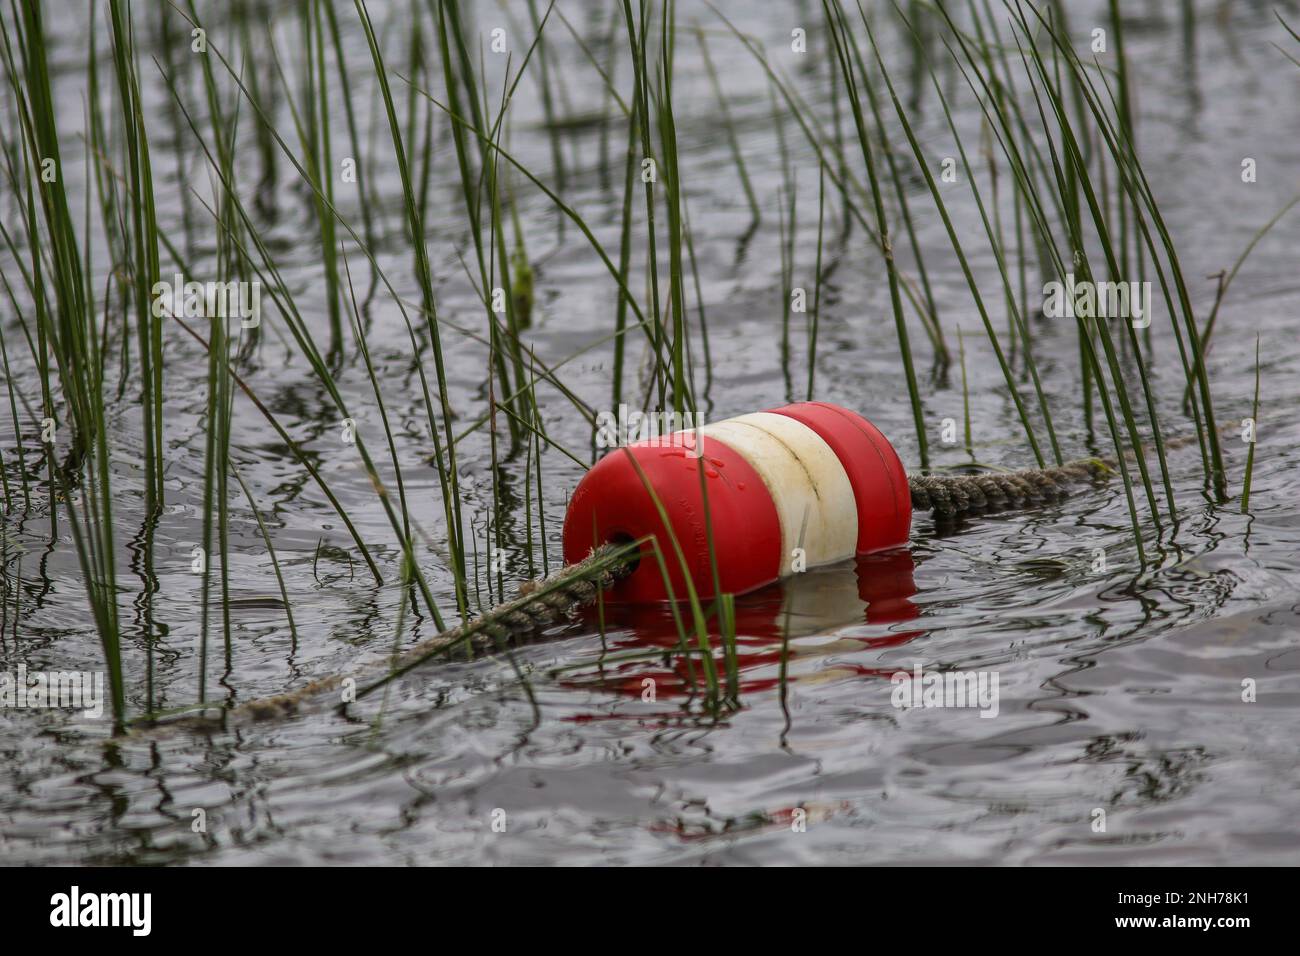 A vibrant red and white inflatable ring buoy bobbing on the surface of a tranquil body of water Stock Photo